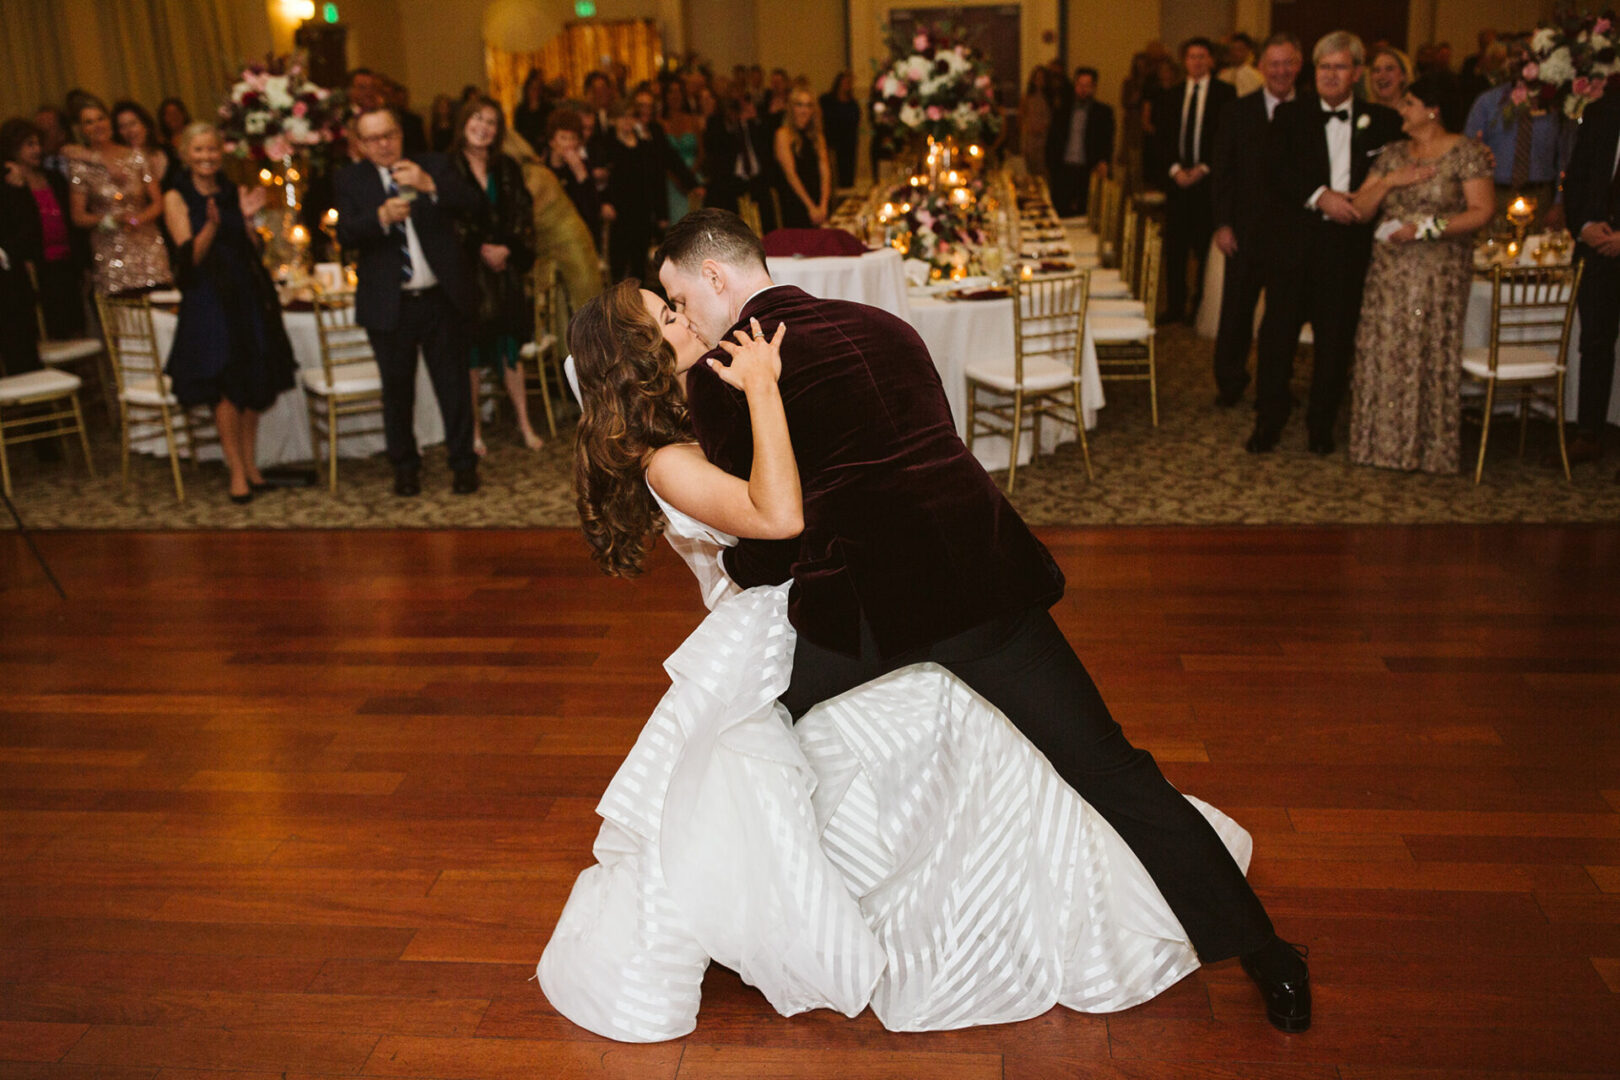 A bride and groom kissing on the dance floor.